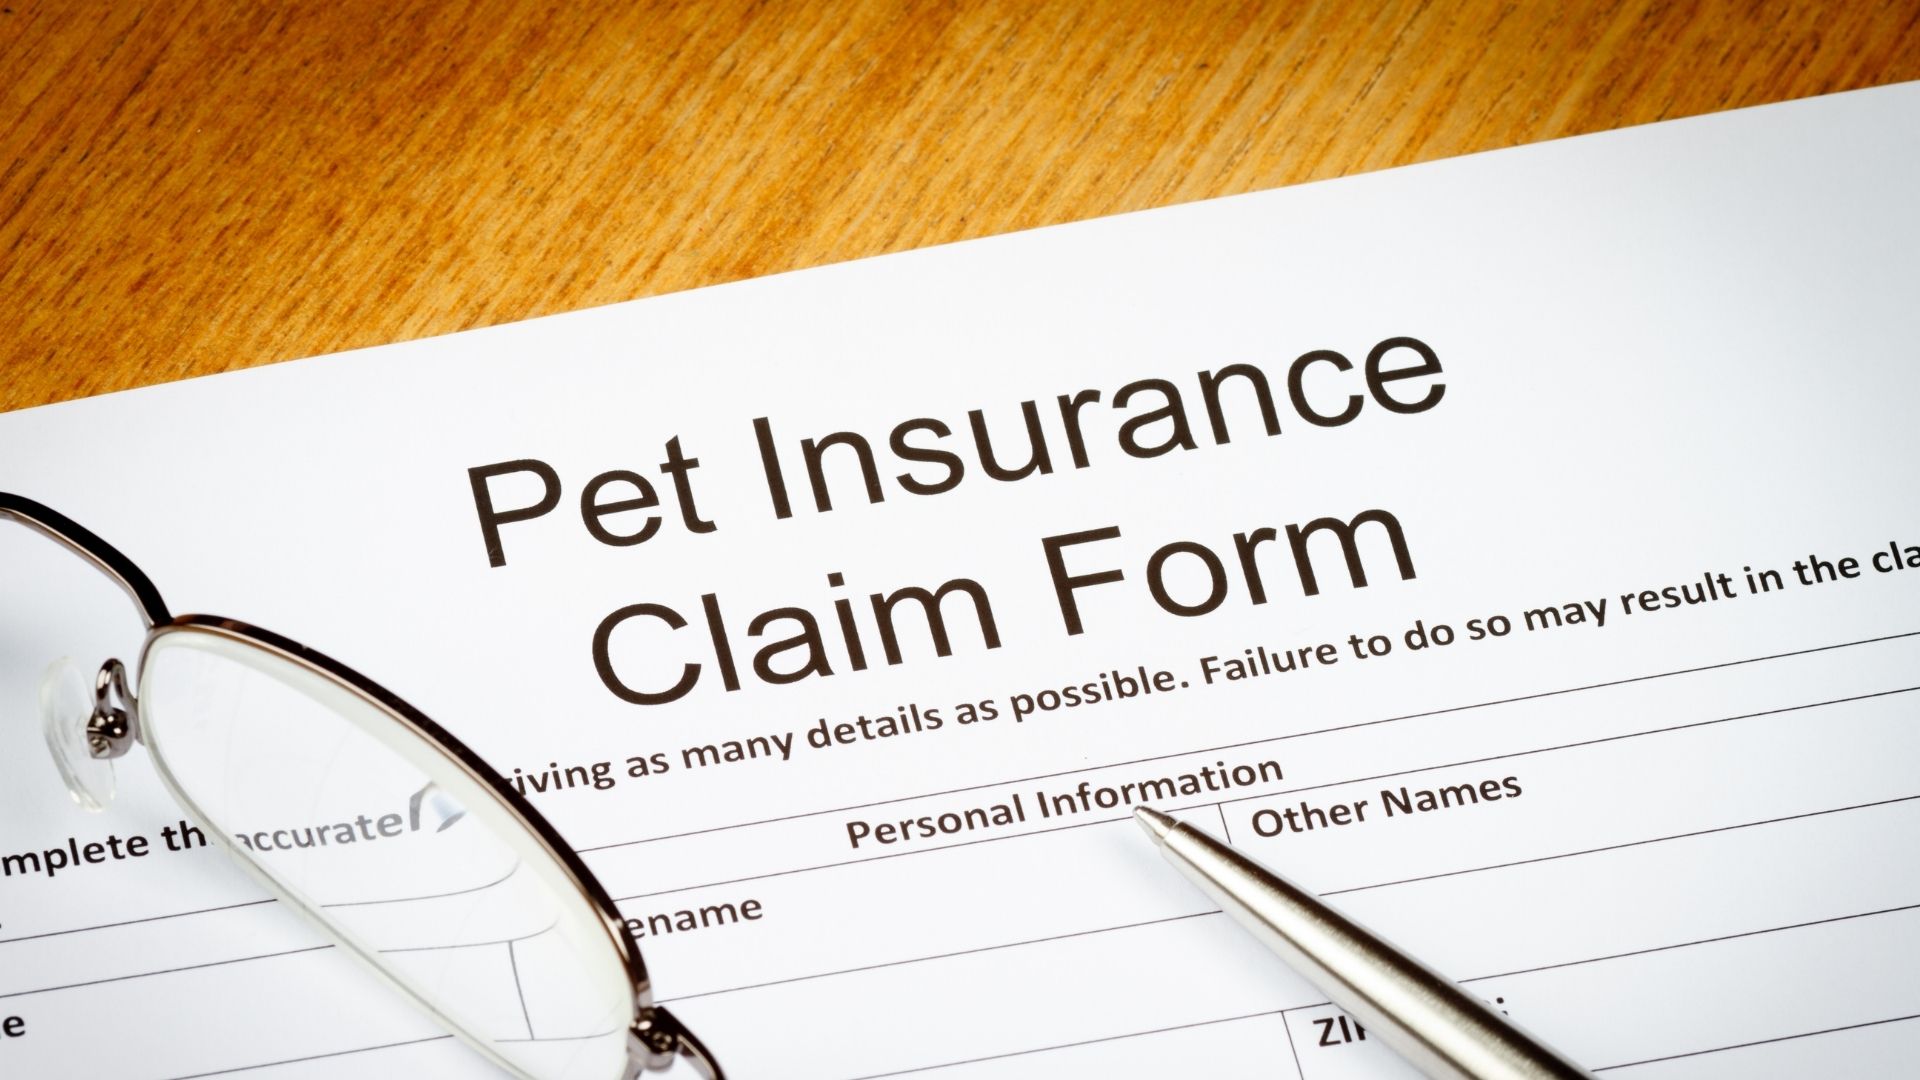 The most important reasons for you to insure your pet